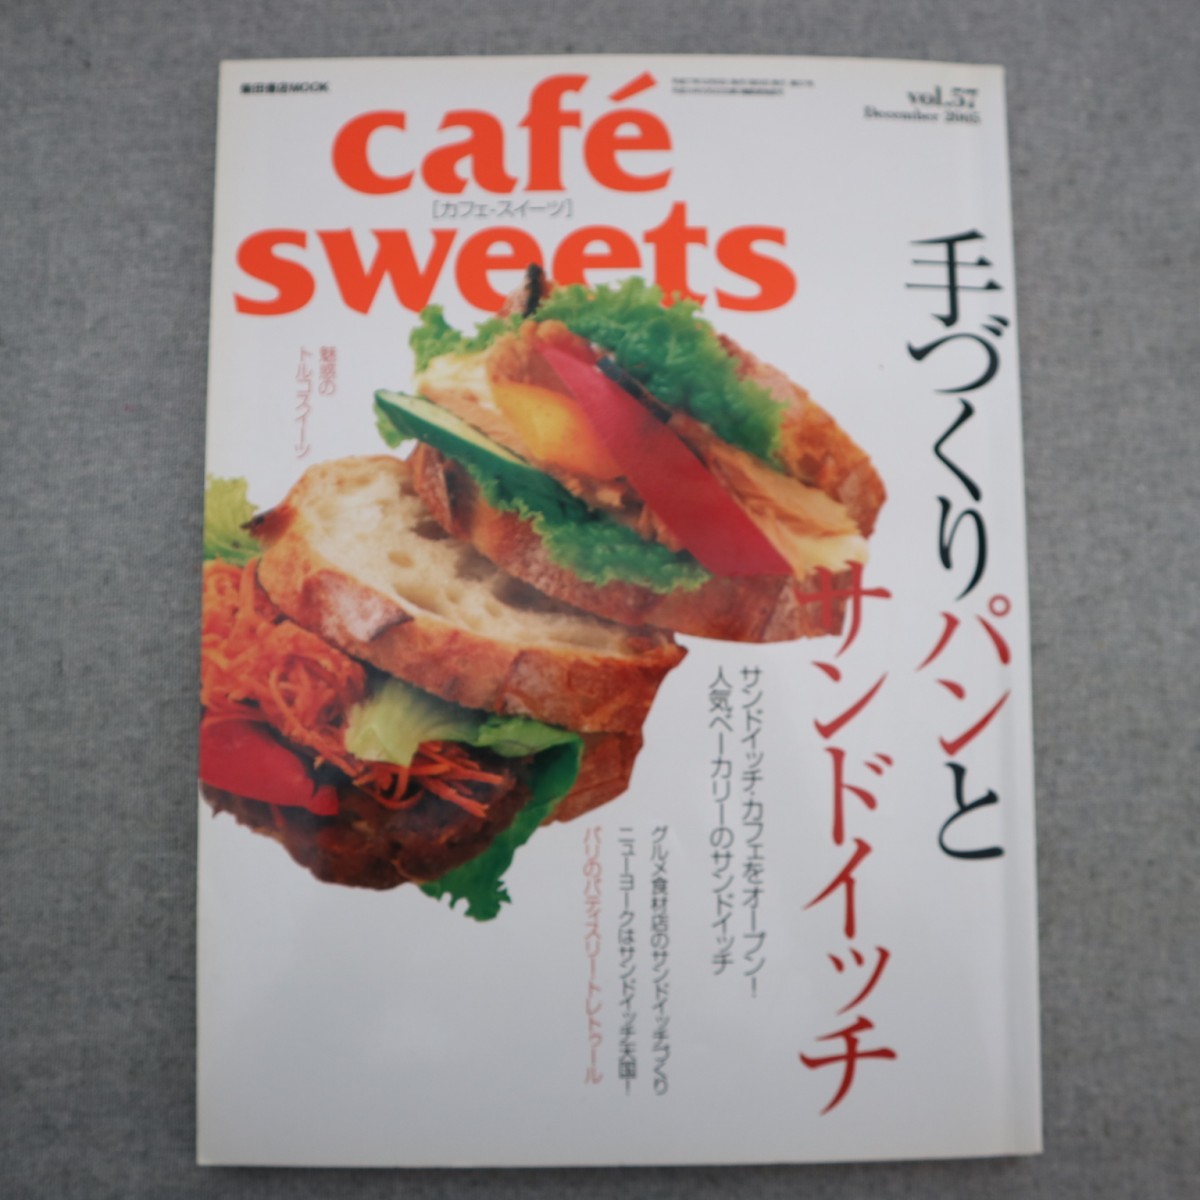  Special 2 51191 / cafe sweets Cafe * sweets 2005 year 12 month number vol.57 hand ... bread . sandwich attraction. Turkey suit sandwich Cafe 